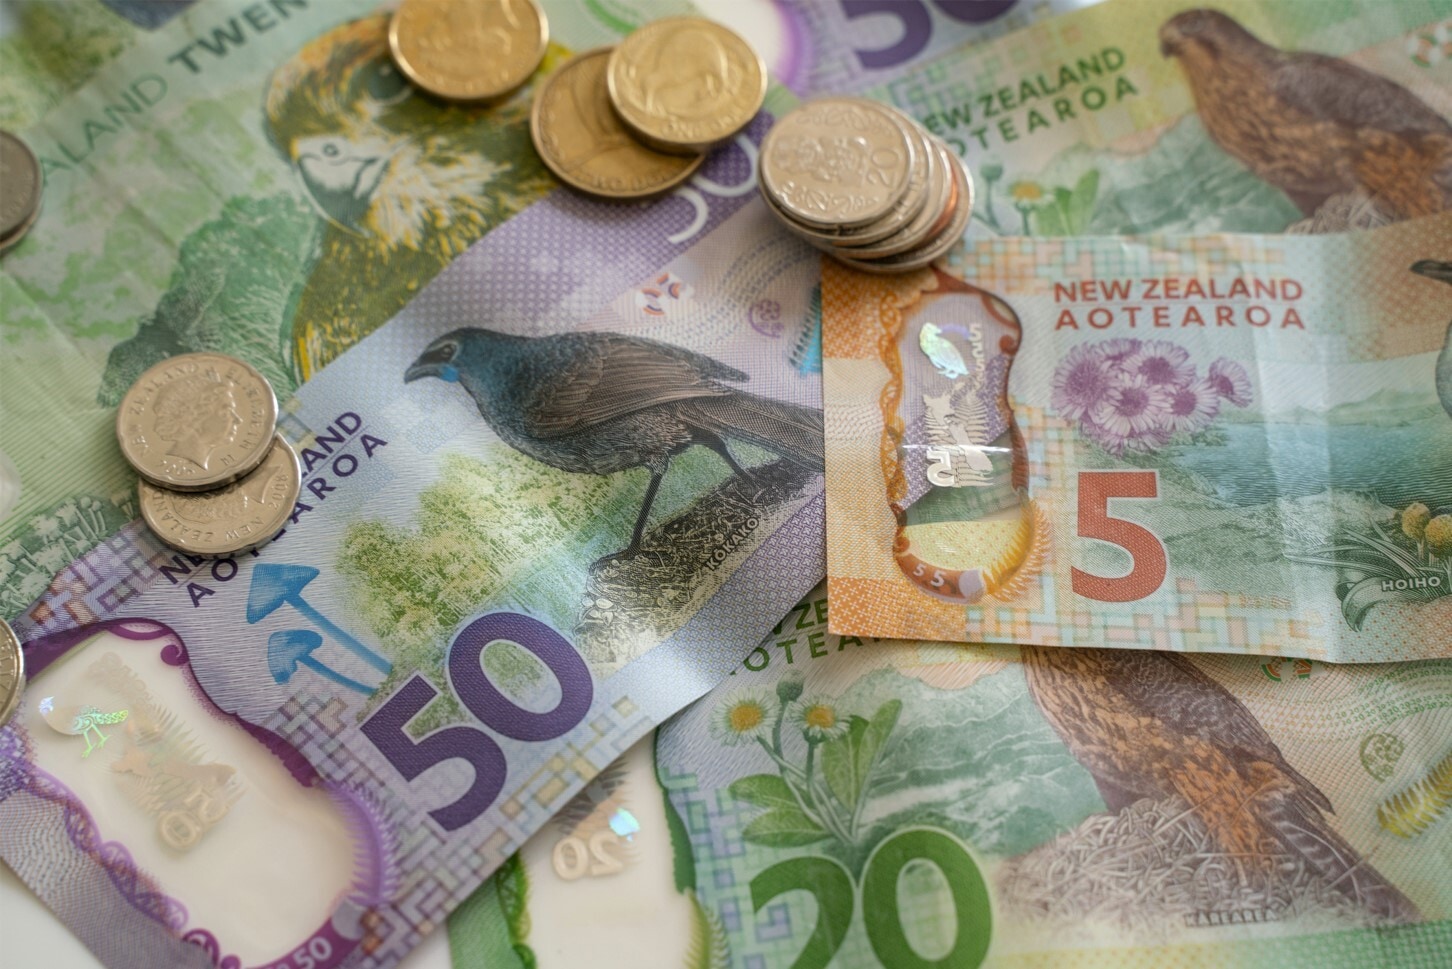 The Kiwi dollar faces upside pressure as RBNZ is set for an unprecedent 75 bps rate hike